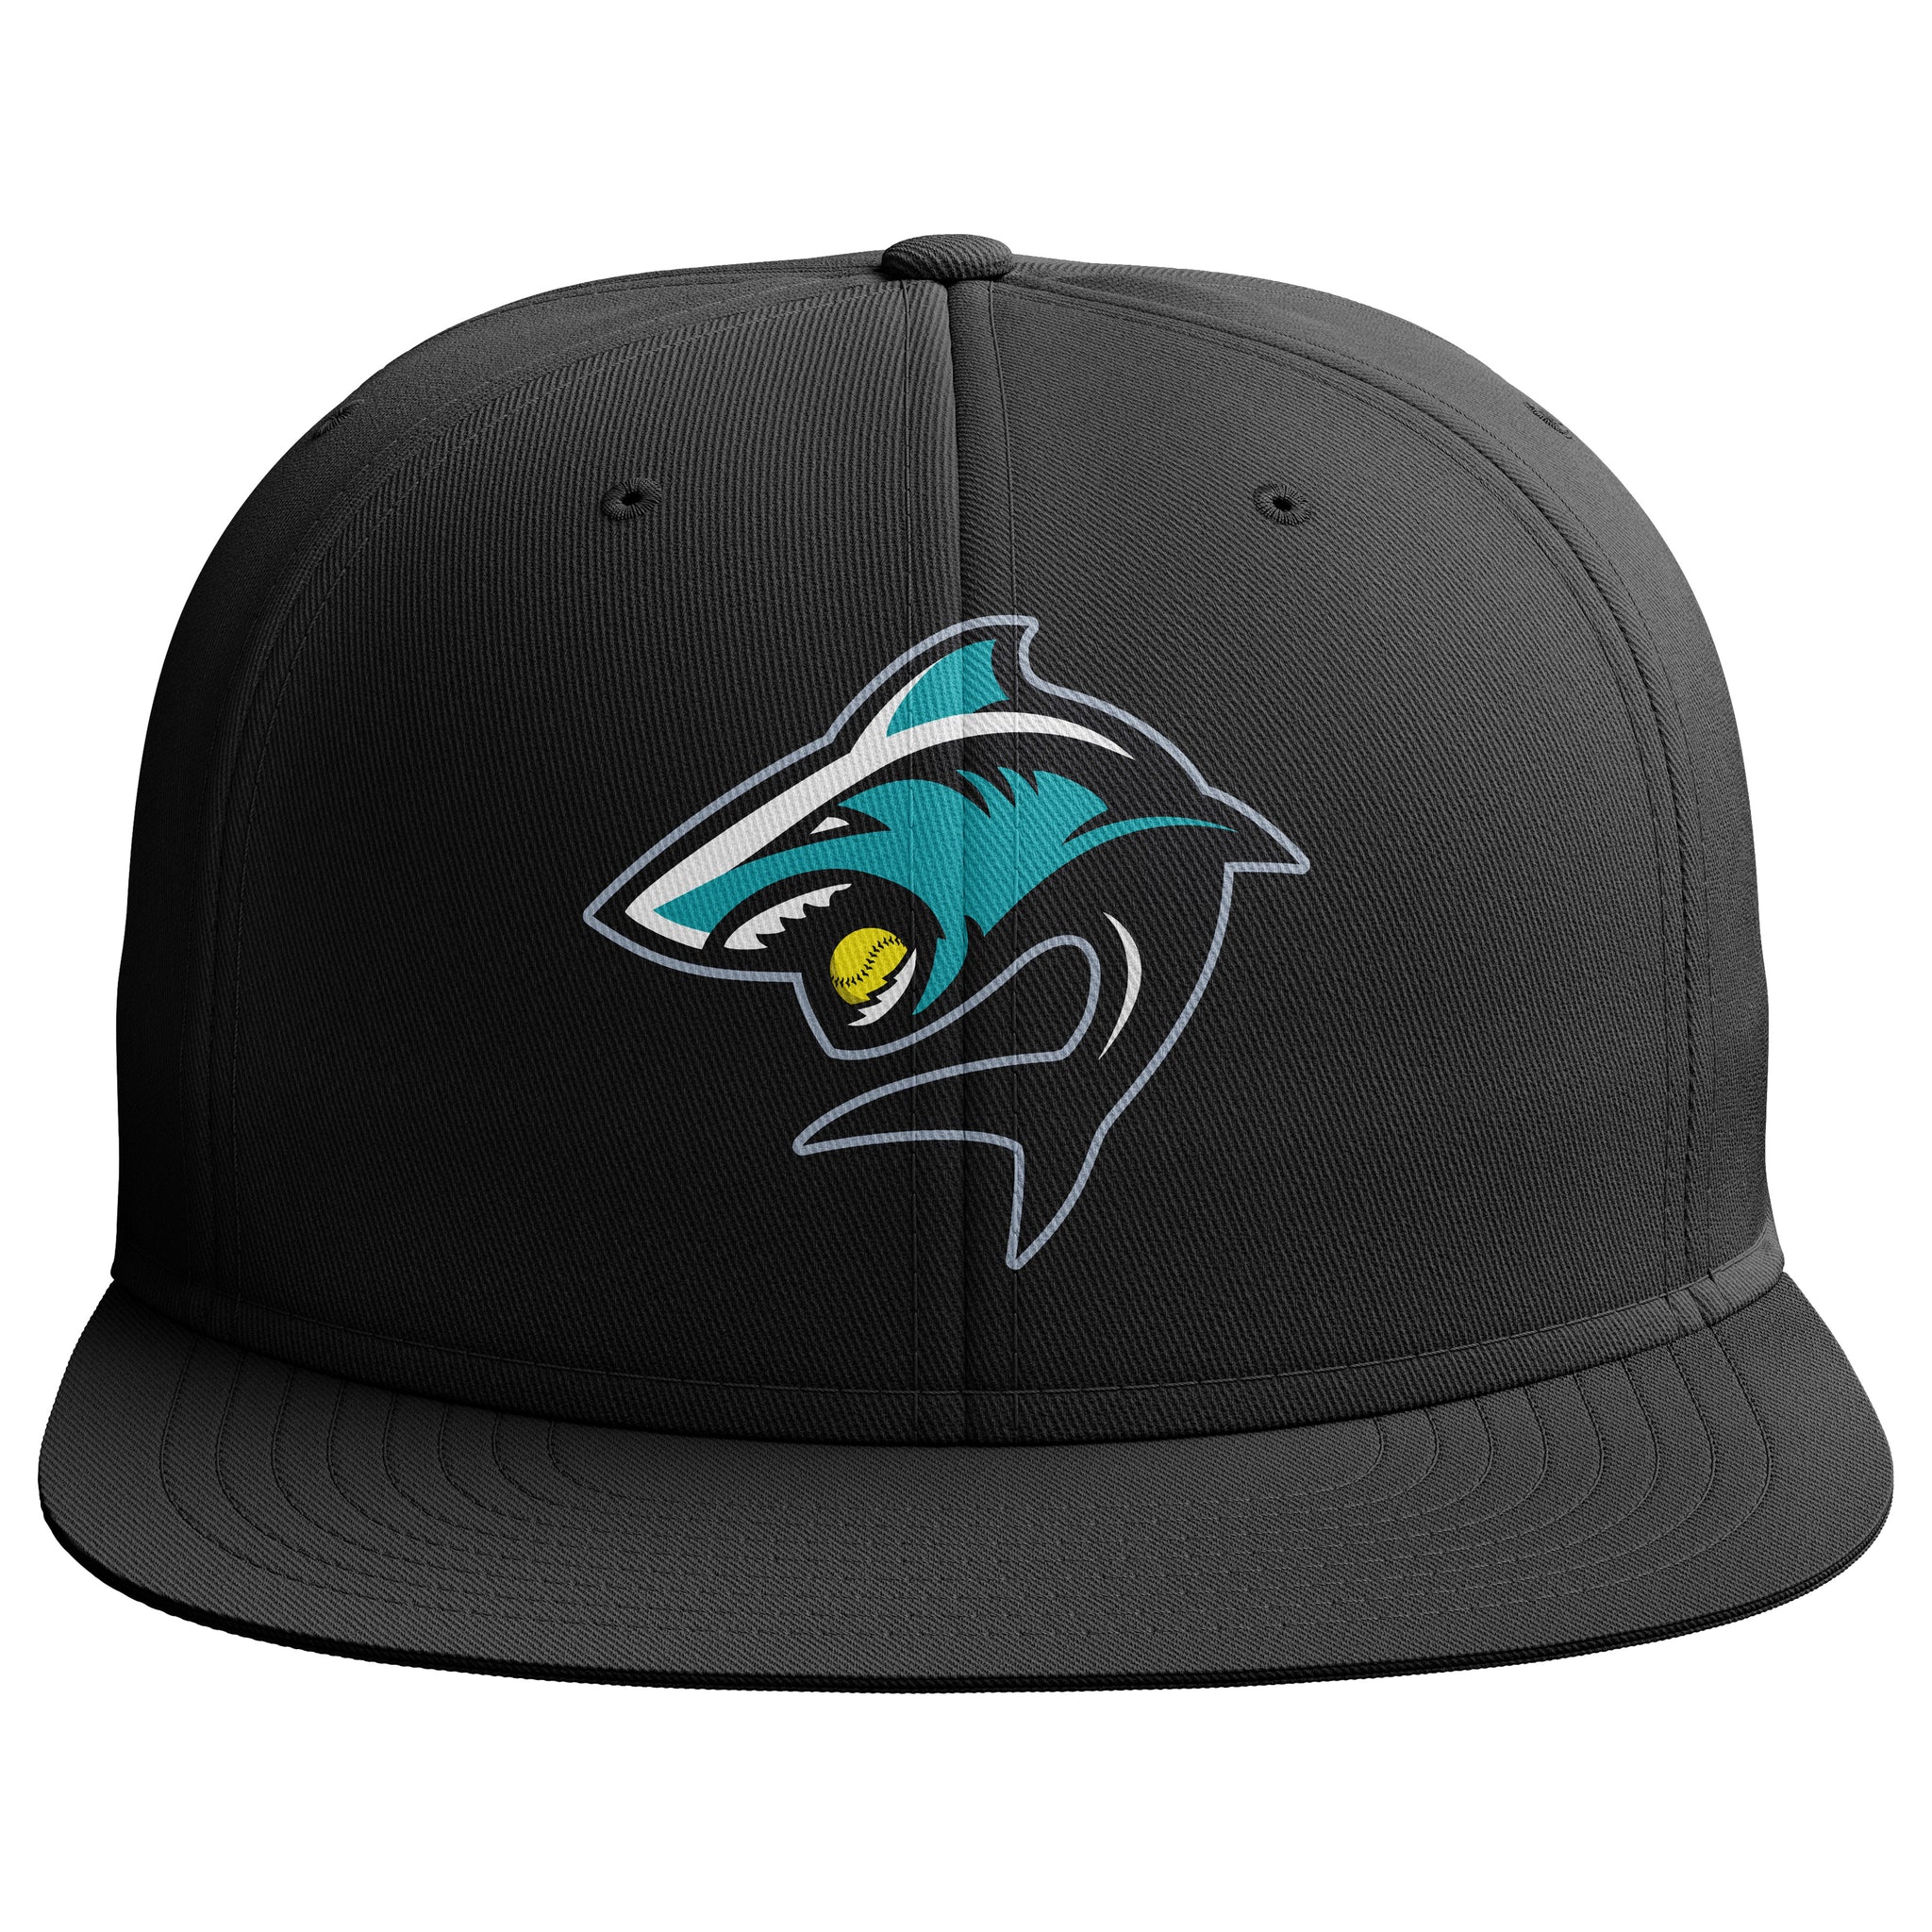 LADY SHARKS 5.0 PTS20 HAT